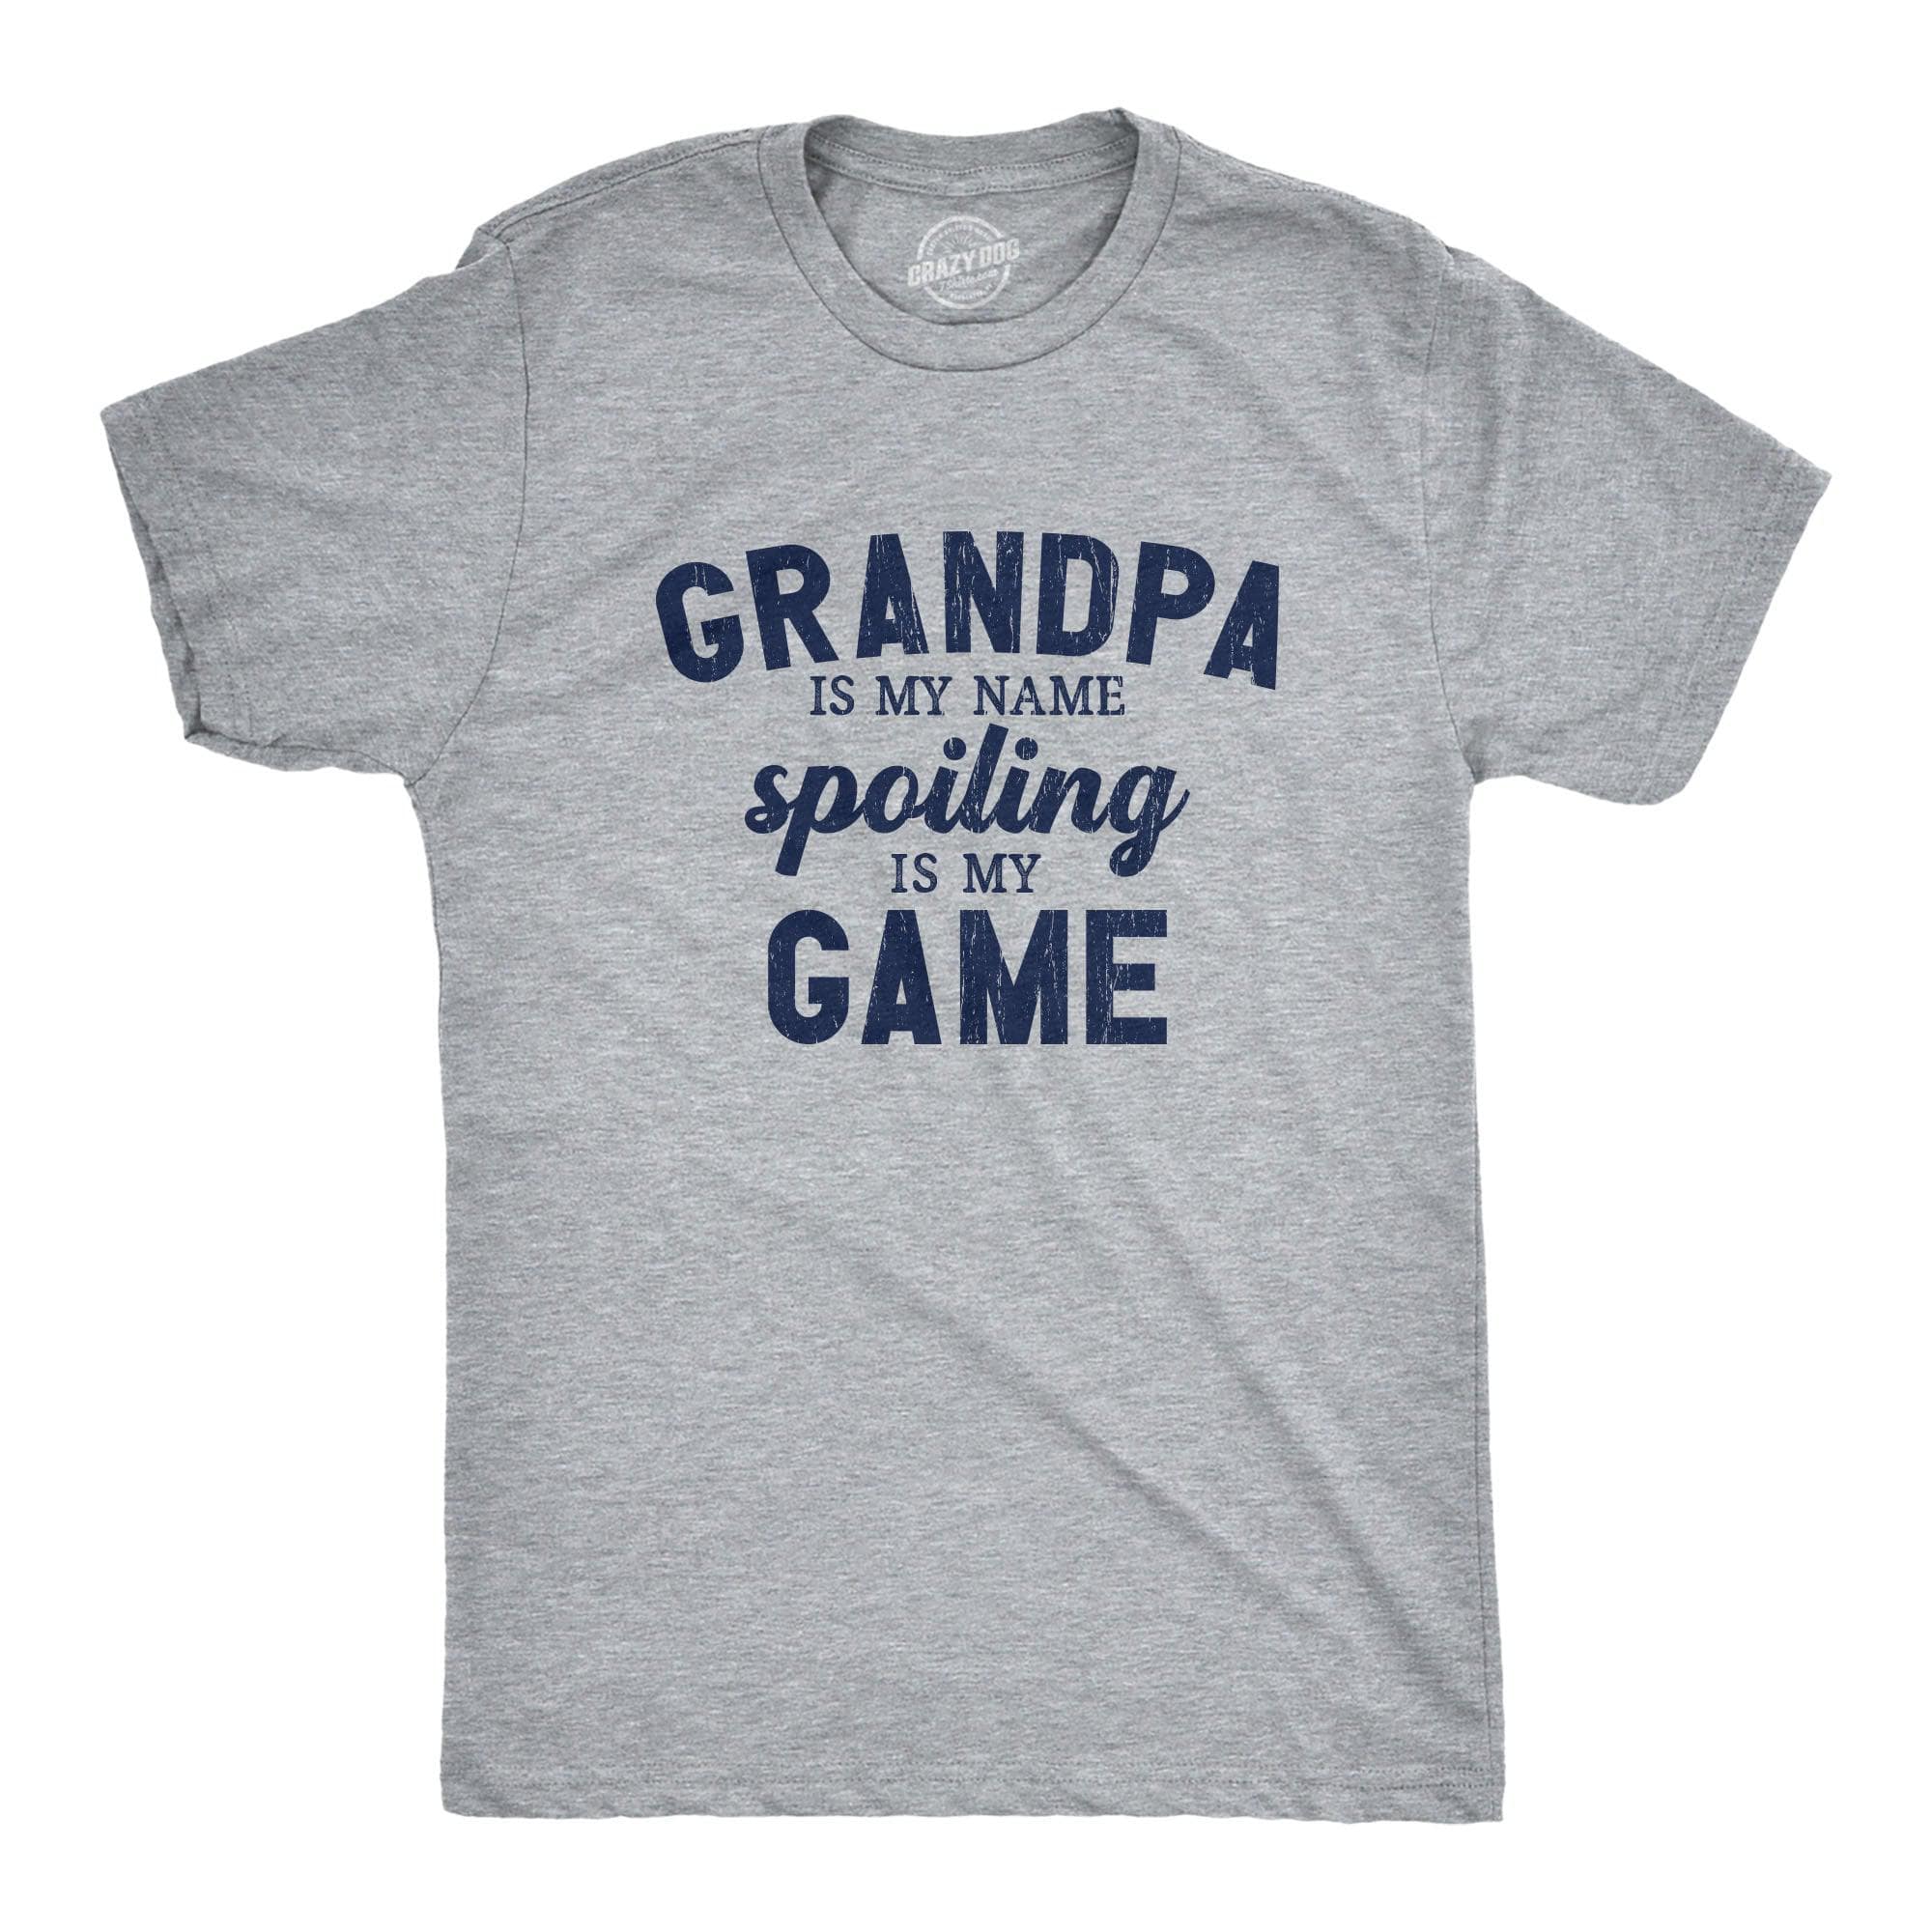 Grandpa Is My Name Spoiling Is My Game Men's Tshirt  -  Crazy Dog T-Shirts